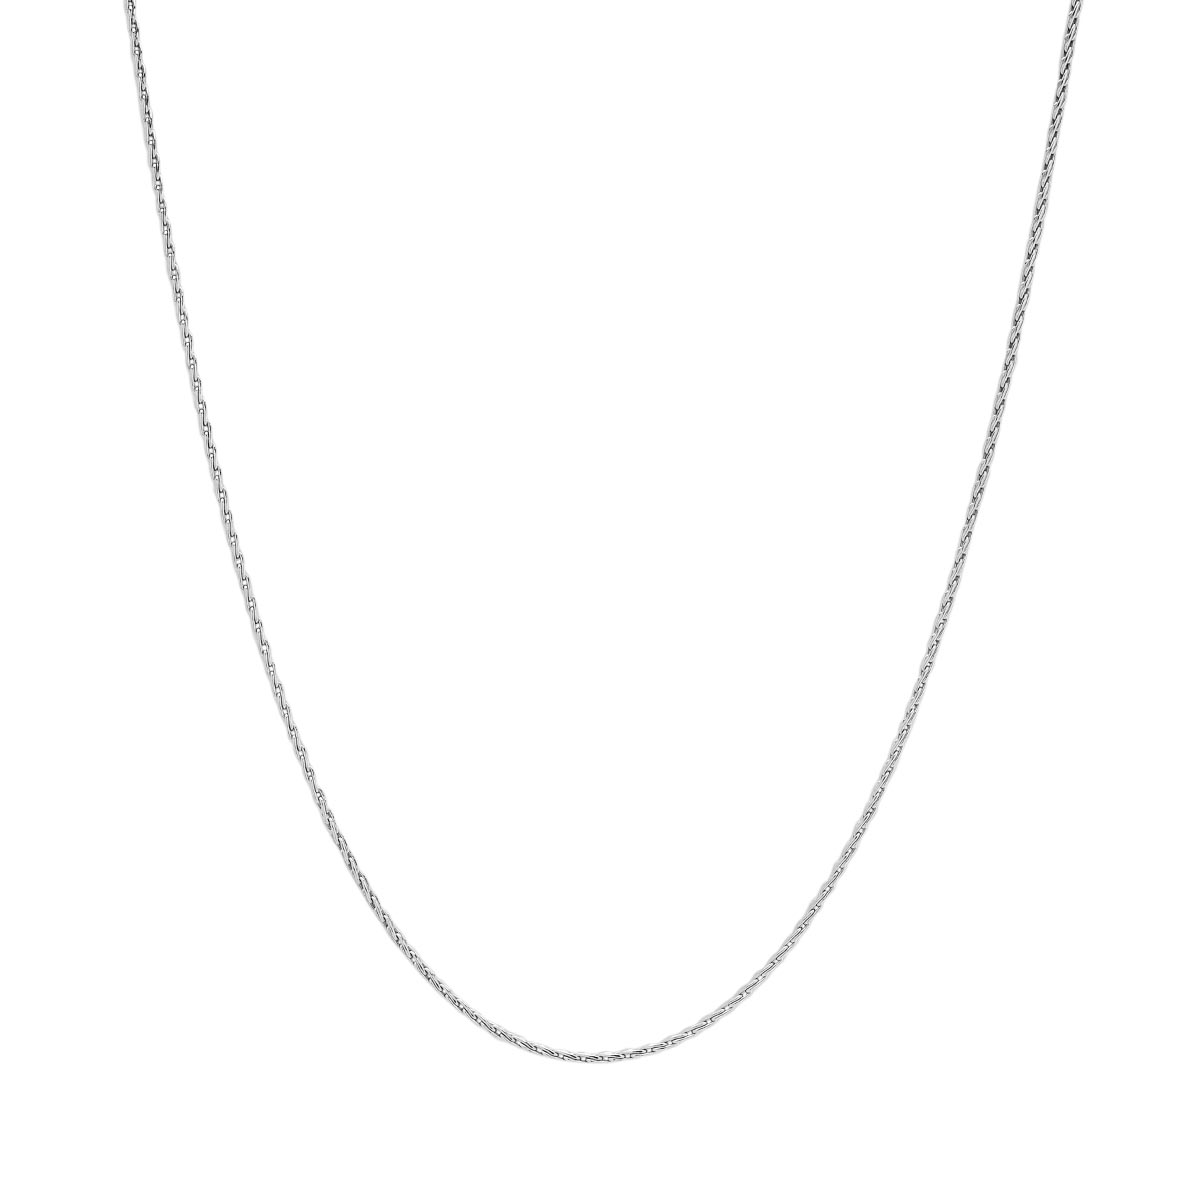 Rhodium Parisian Wheat Chain in Sterling Silver (18 inches and 1.2mm wide)